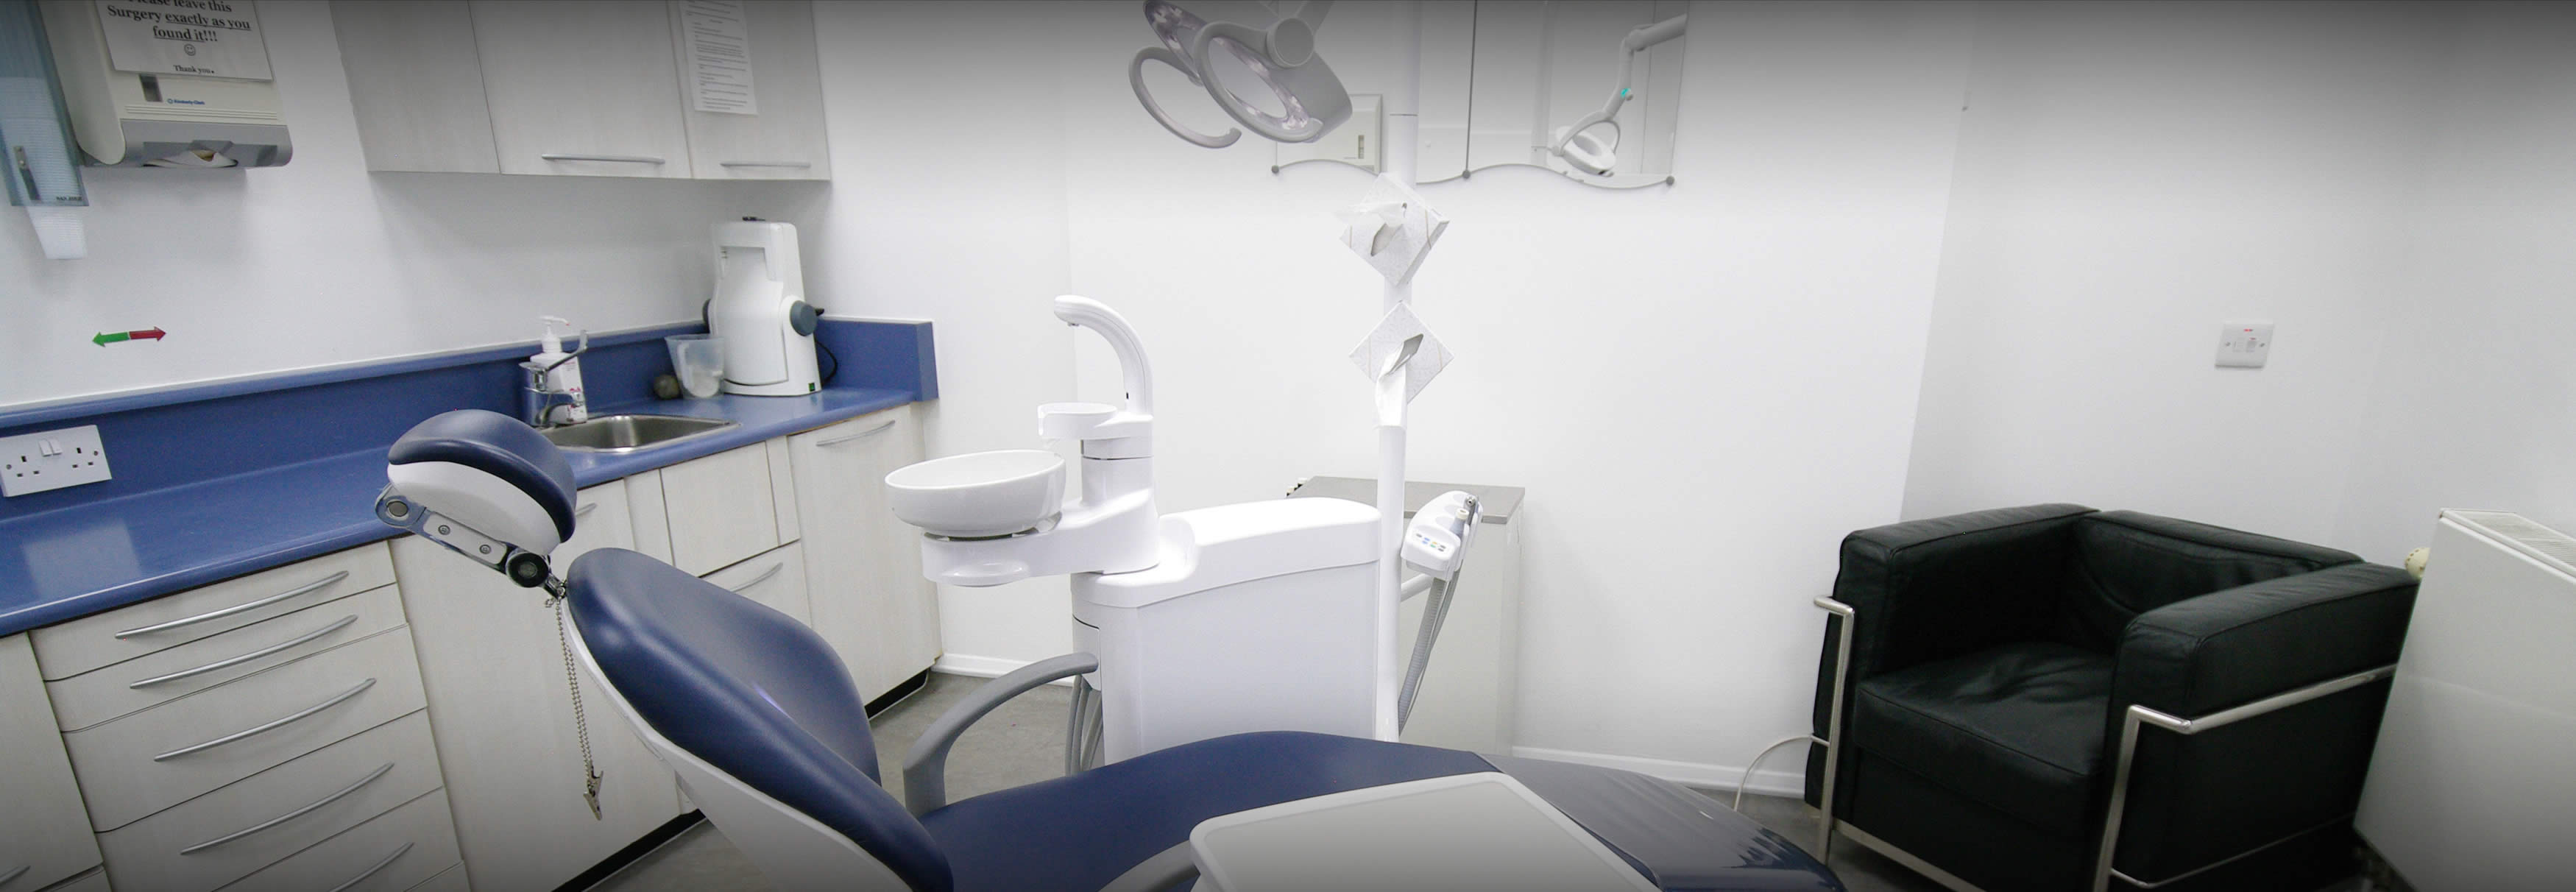 Dental Referrals at The Dental Gallery in Ealing